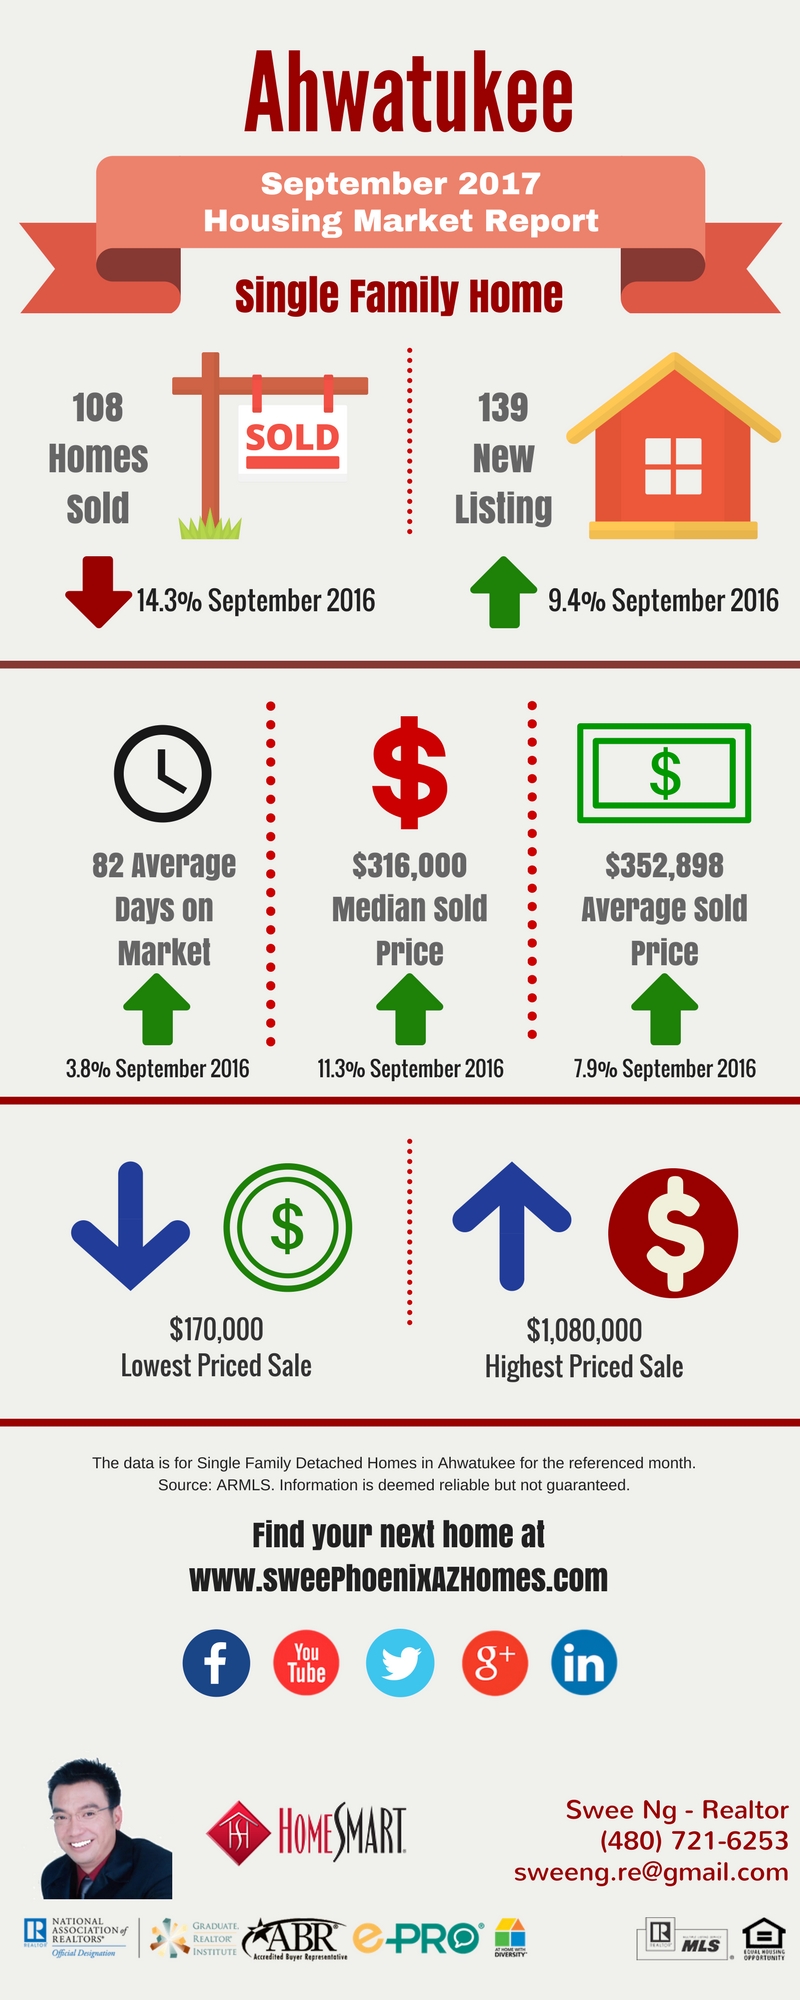 Ahwatukee Housing Market Trends Report September 2017, House Value, Real Estate and Statistic by Swee Ng